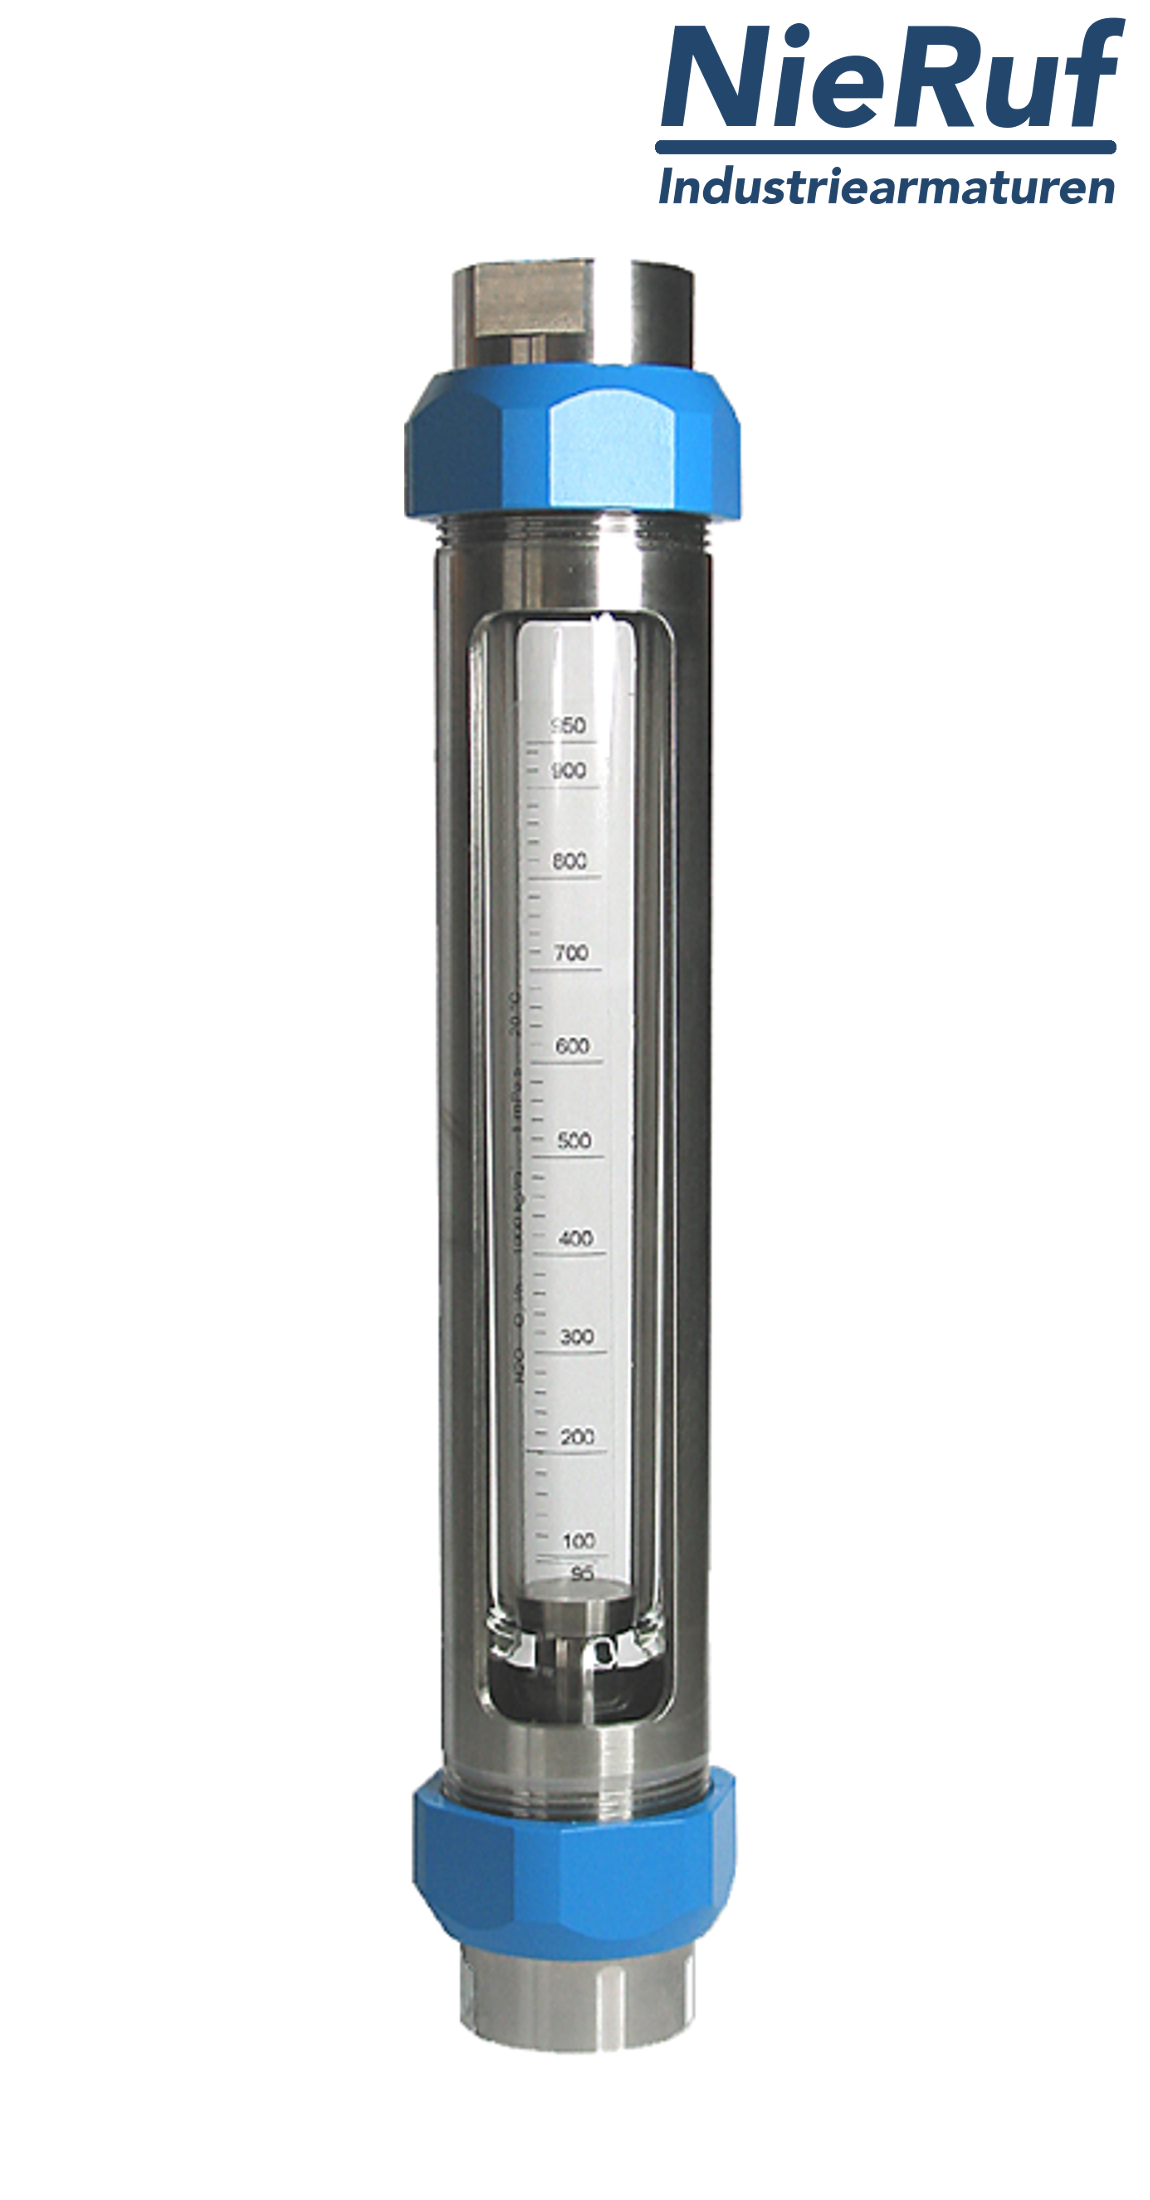 Variable area flowmeter stainless steel + borosilicate 1/2" inch 10.0 - 100.0 l/h water FKM